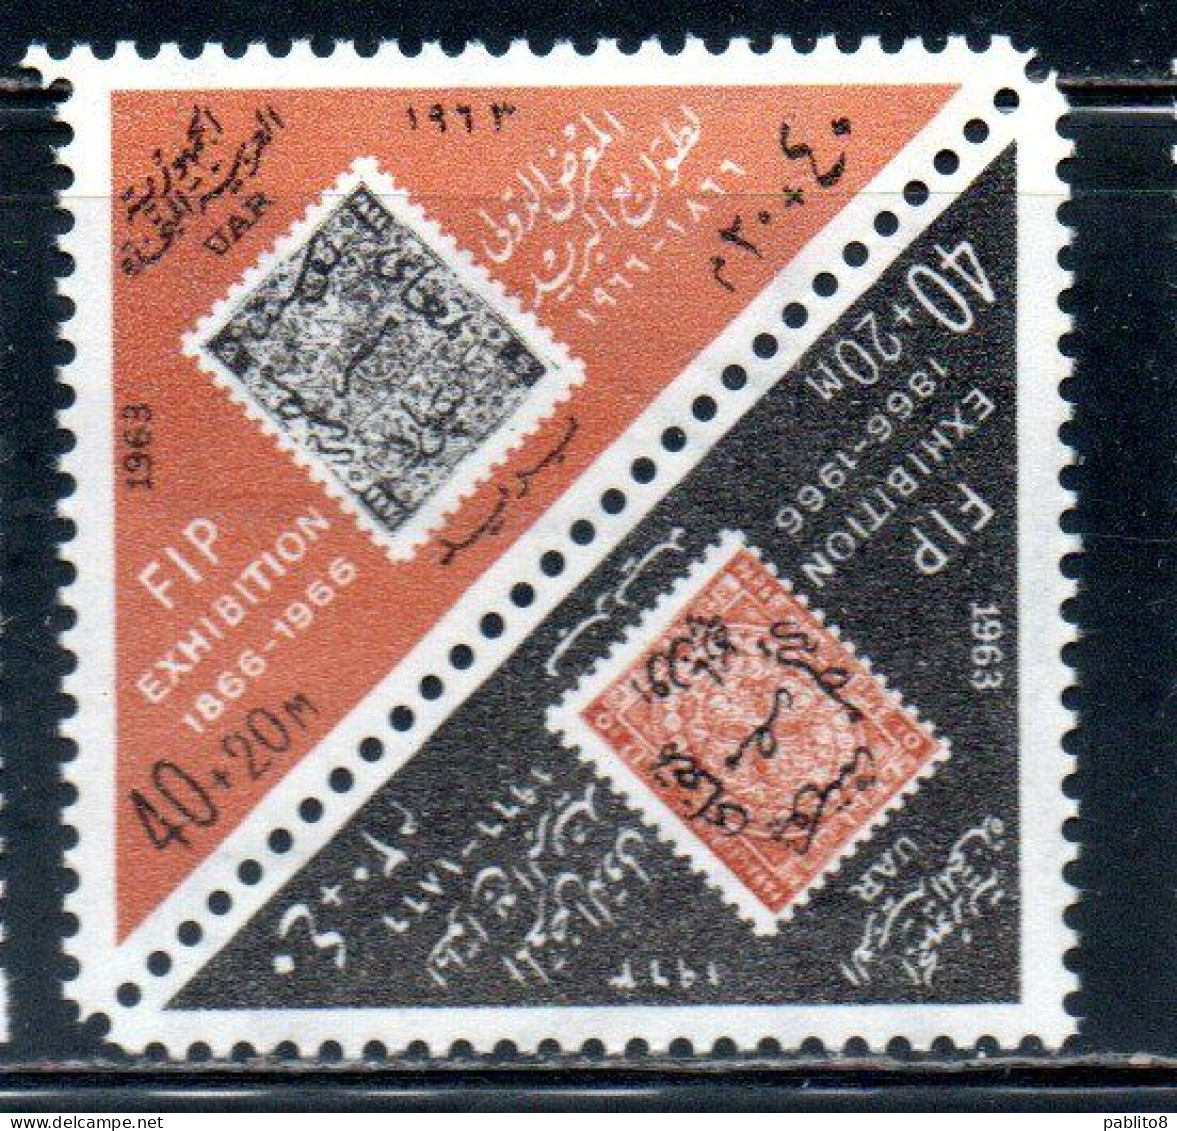 UAR EGYPT EGITTO 1963 POST DAY AND STAMP EXHIBITION 1966 OF THE FIP 40m + 20m MNH - Nuevos